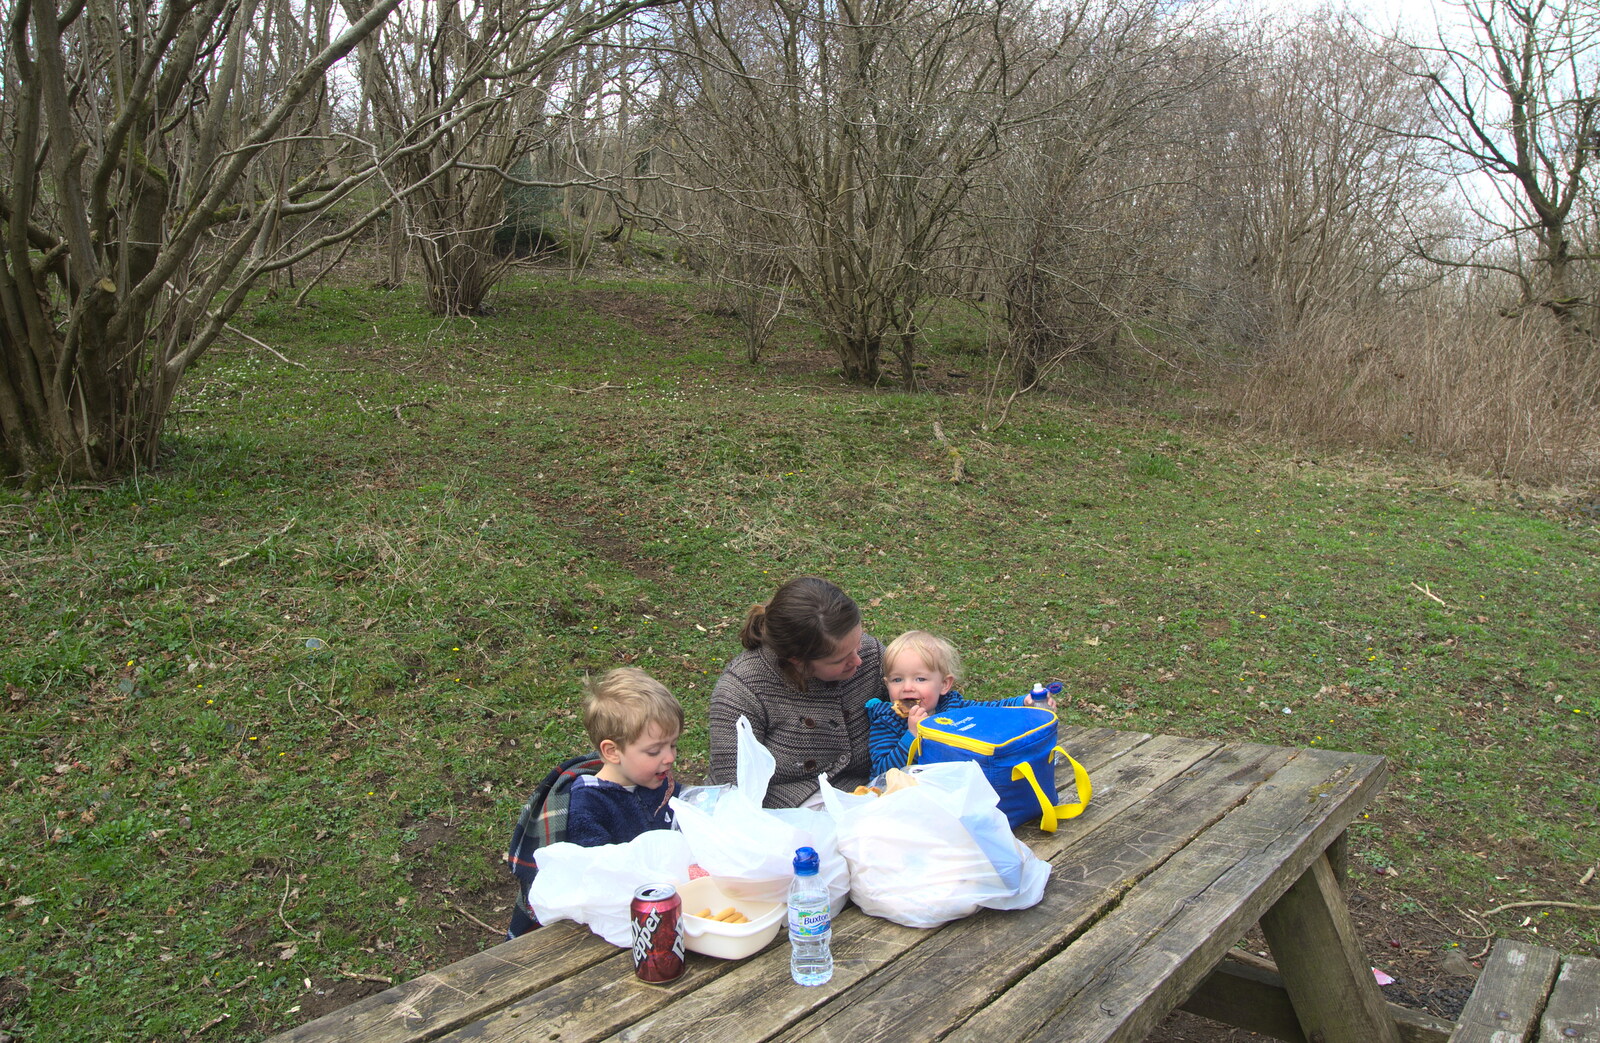 Picnic on a bench from Chesterfield and the Twisty Spire, Derbyshire - 19th April 2013